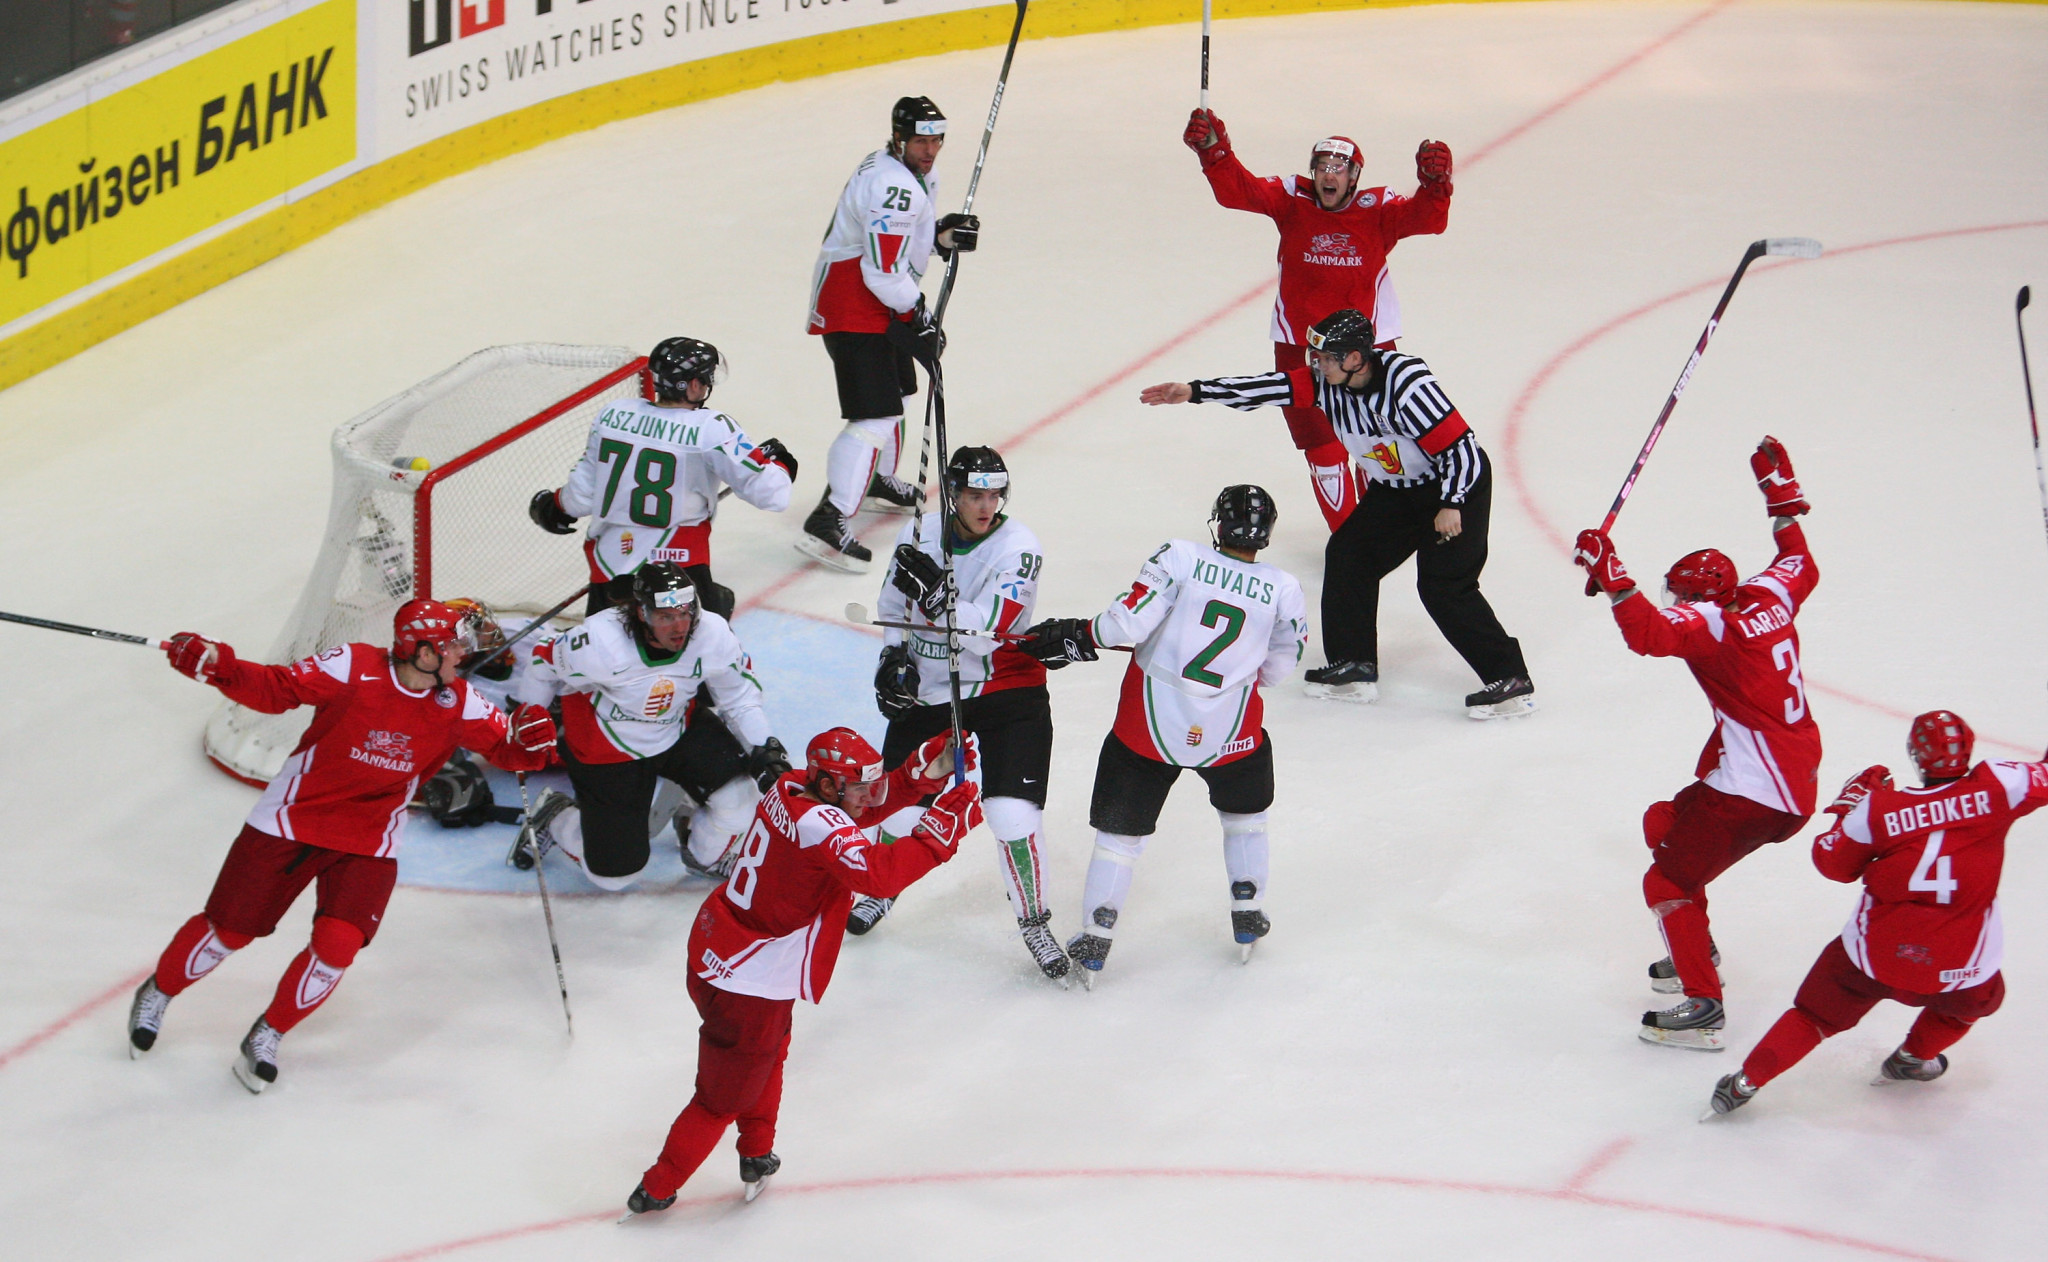 Denmark celebrate during a match against Hungary at the 2009 World Championship ©Getty Images